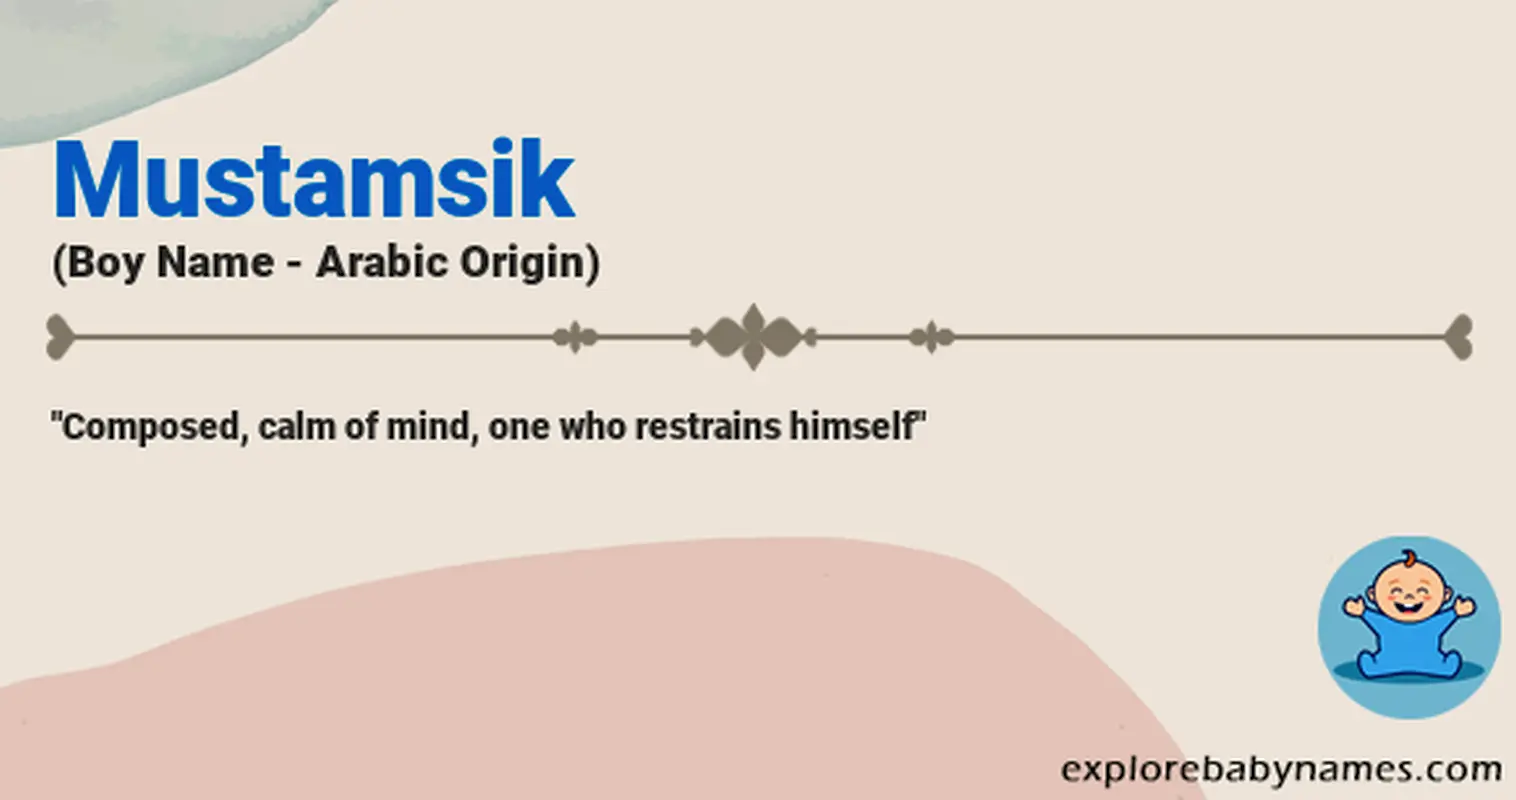 Meaning of Mustamsik